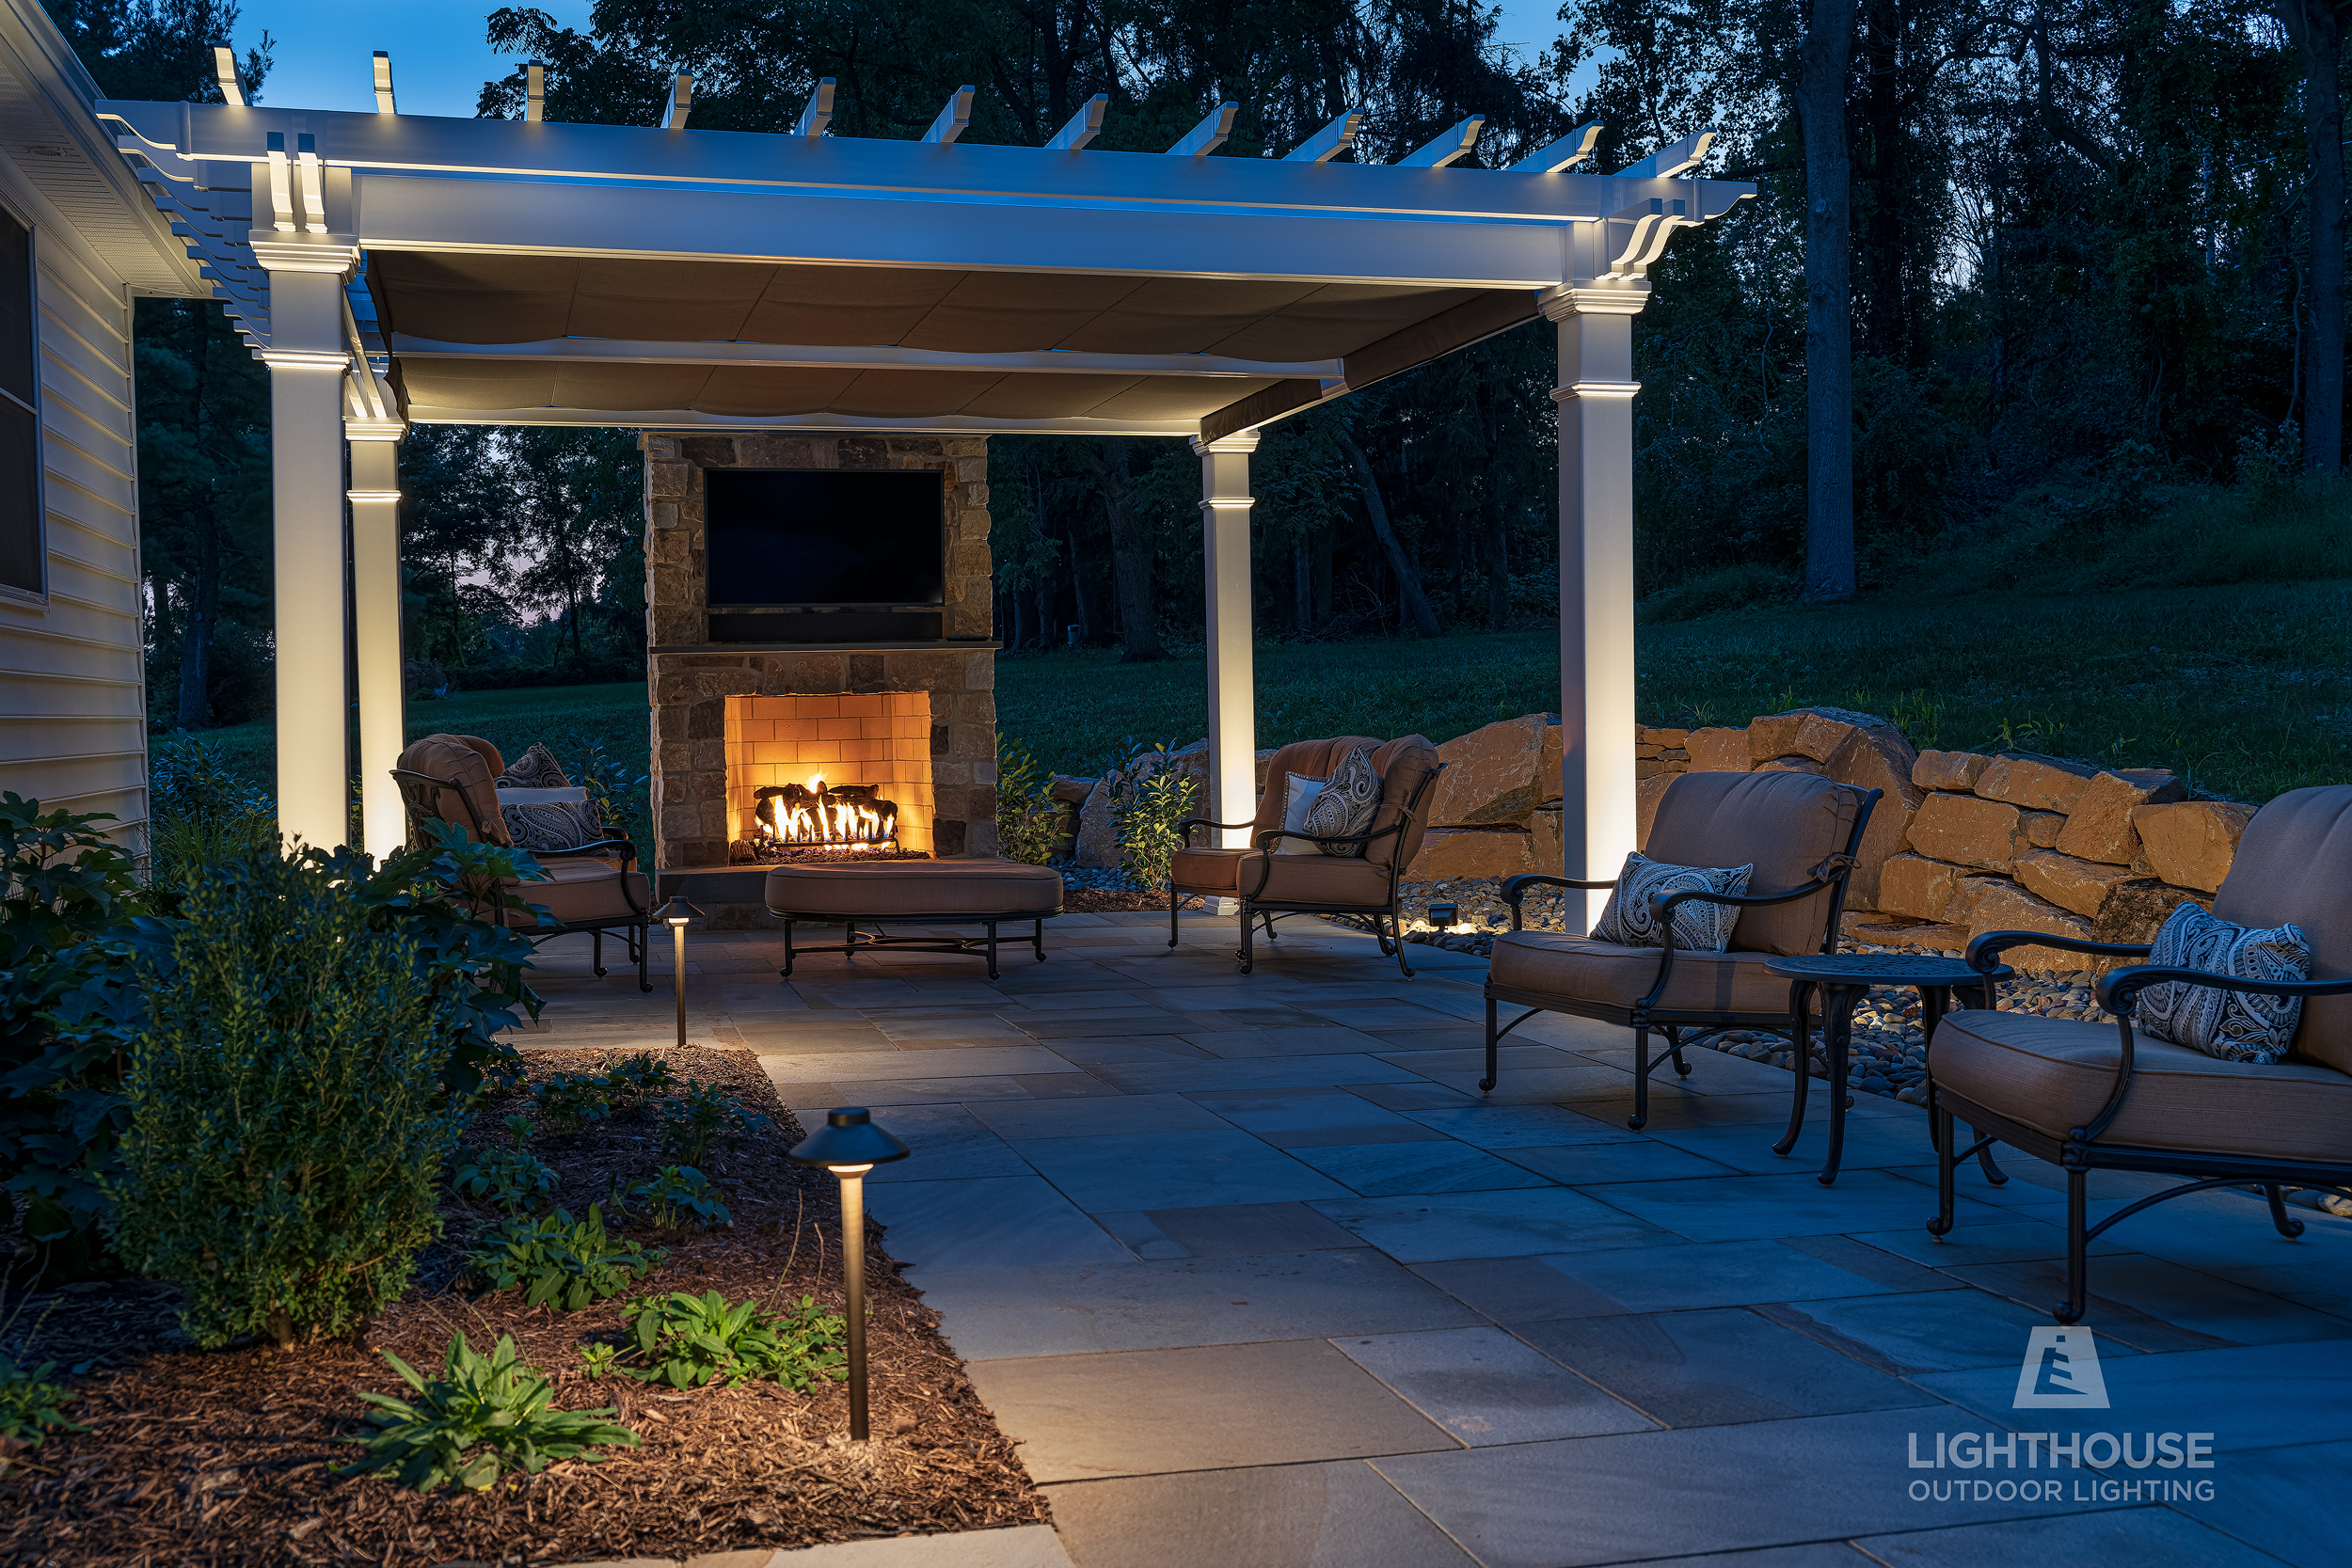 Low Voltage Landscape Lighting in Lake Darby, OH